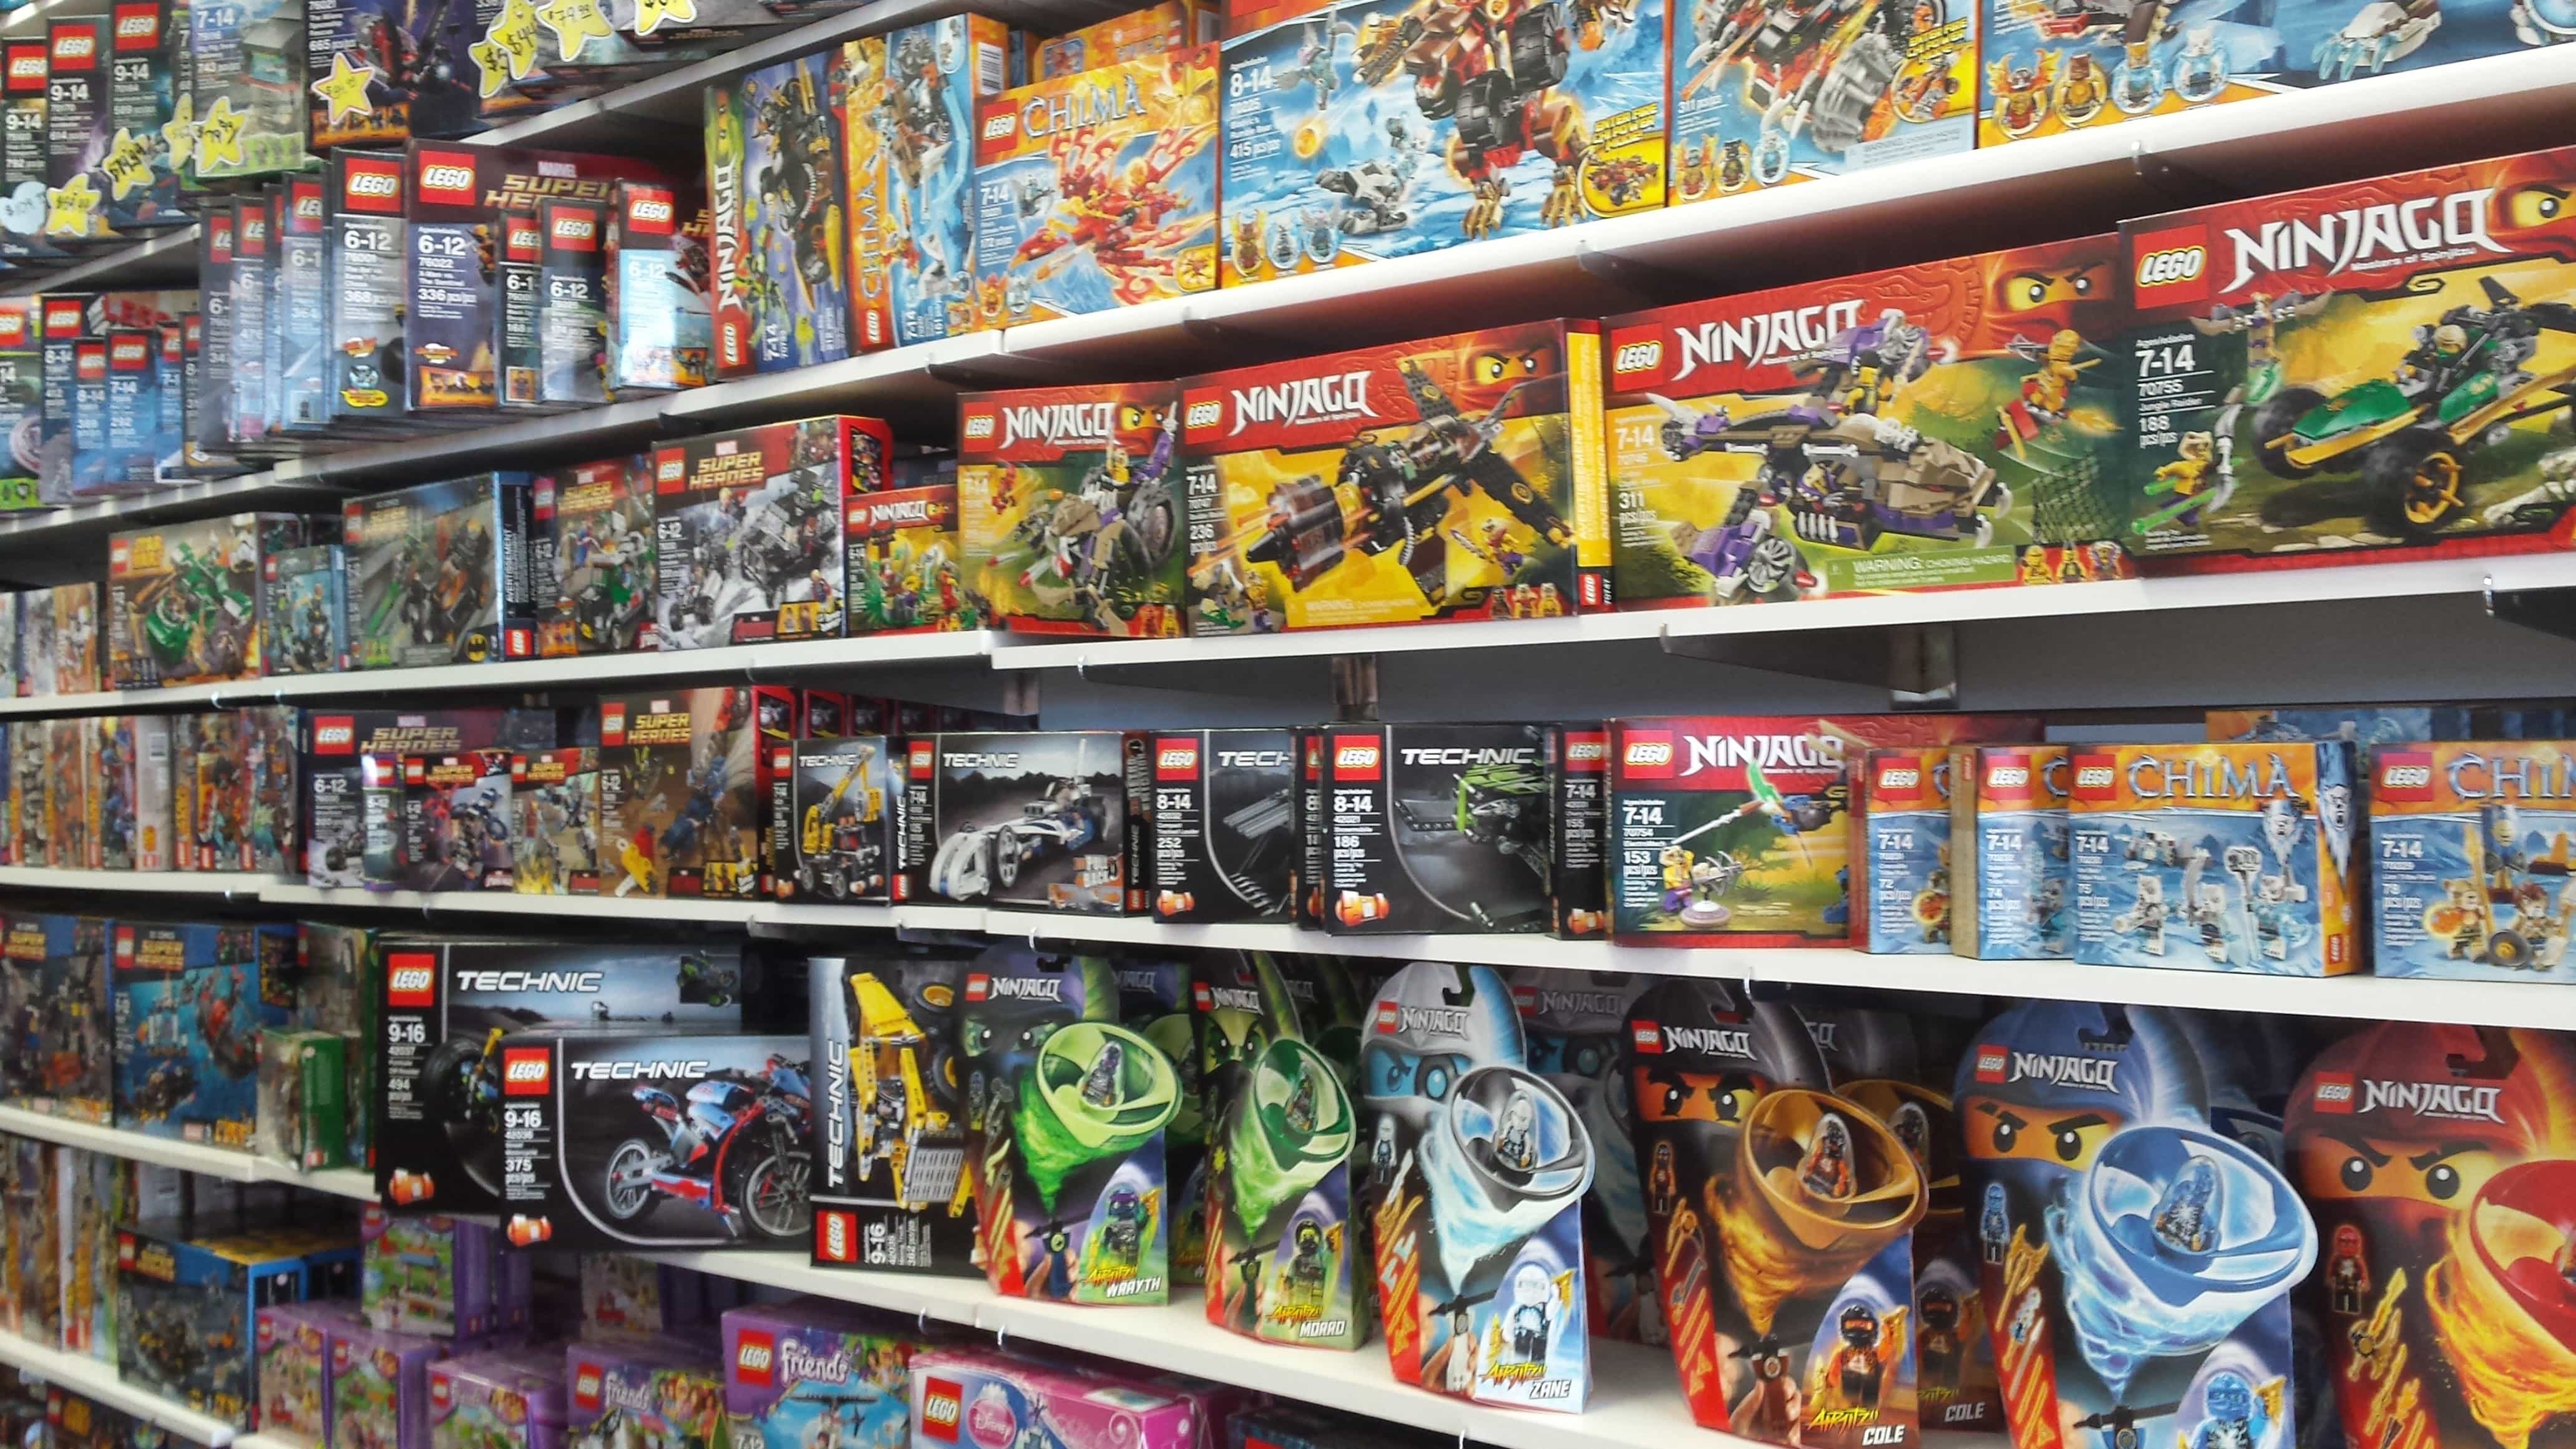 10 of the Top Toy Stores in Minnesota